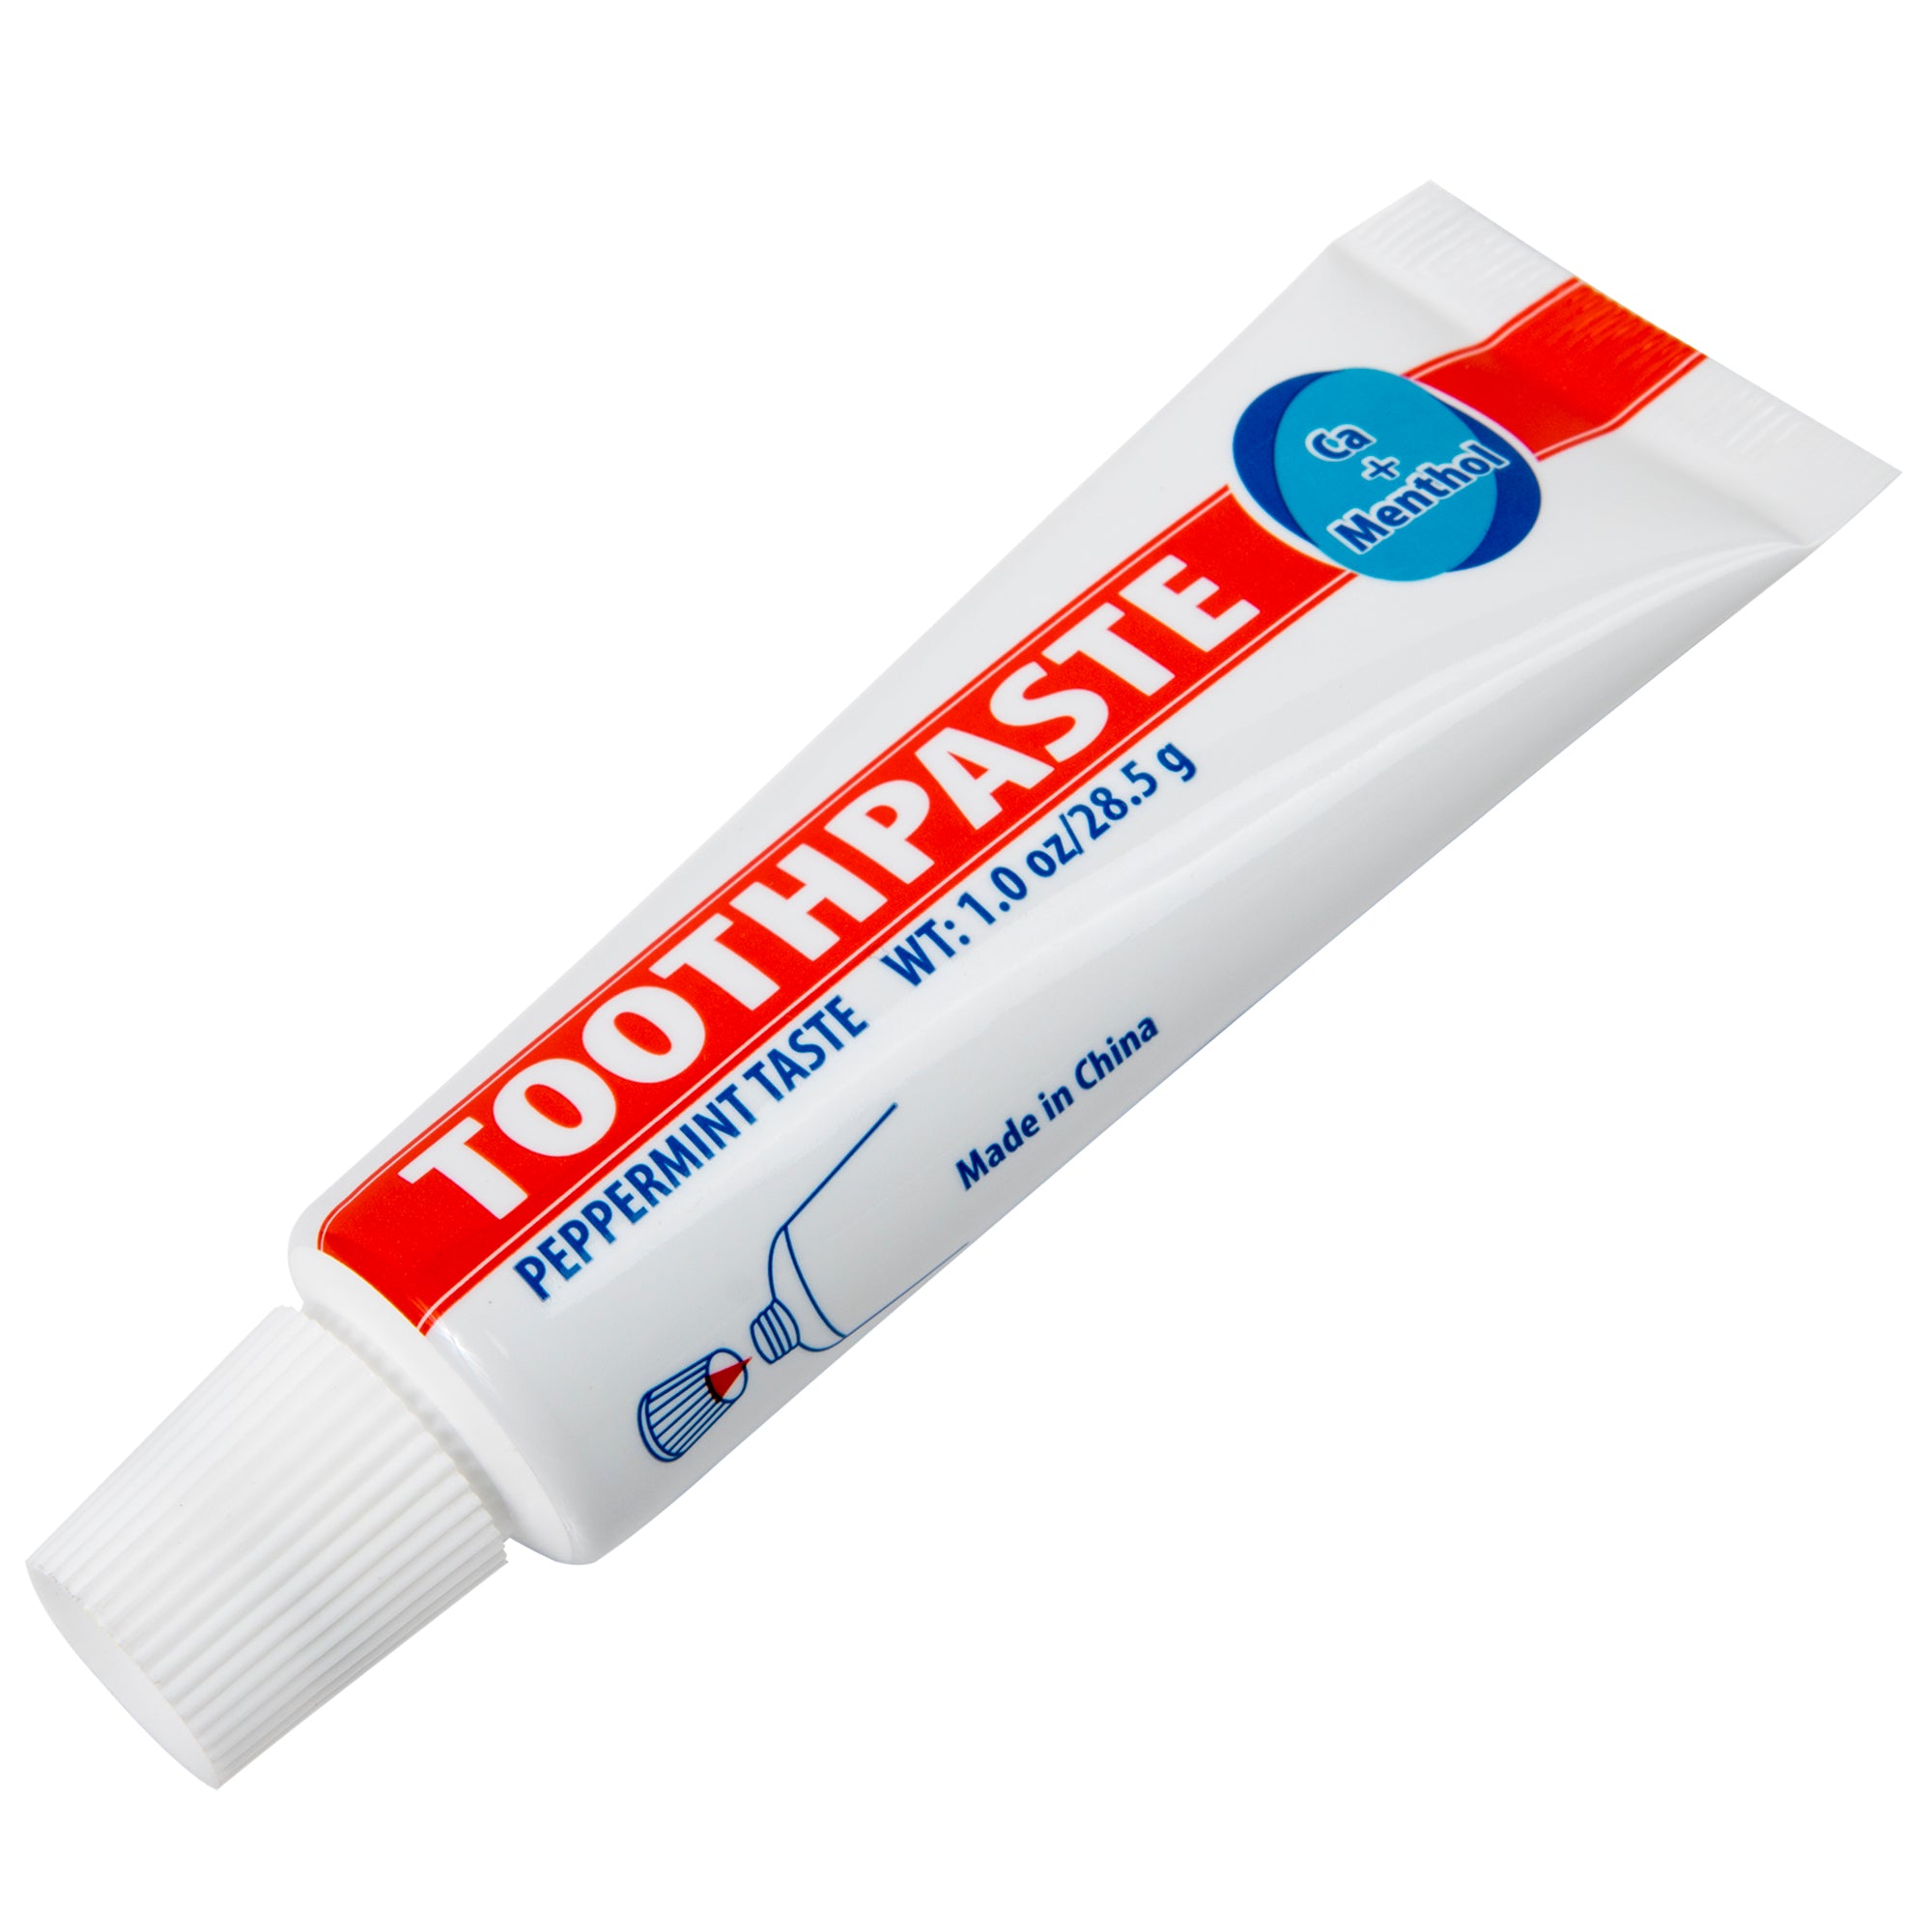 Wholesale Toothpaste - 1 Ounce (28.5 Grams)